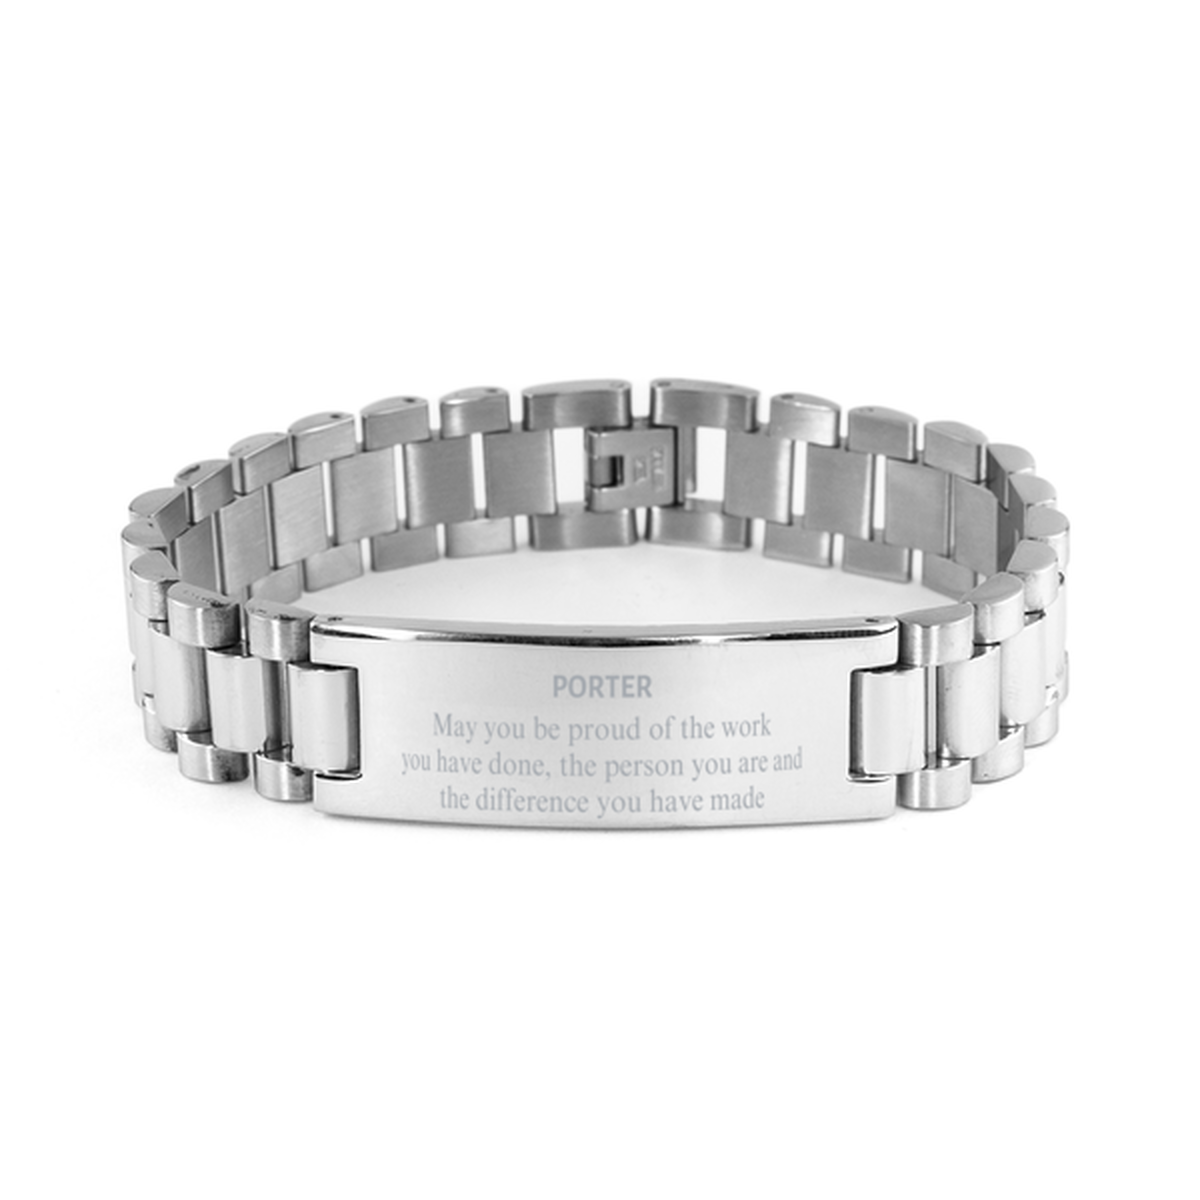 Porter May you be proud of the work you have done, Retirement Porter Ladder Stainless Steel Bracelet for Colleague Appreciation Gifts Amazing for Porter